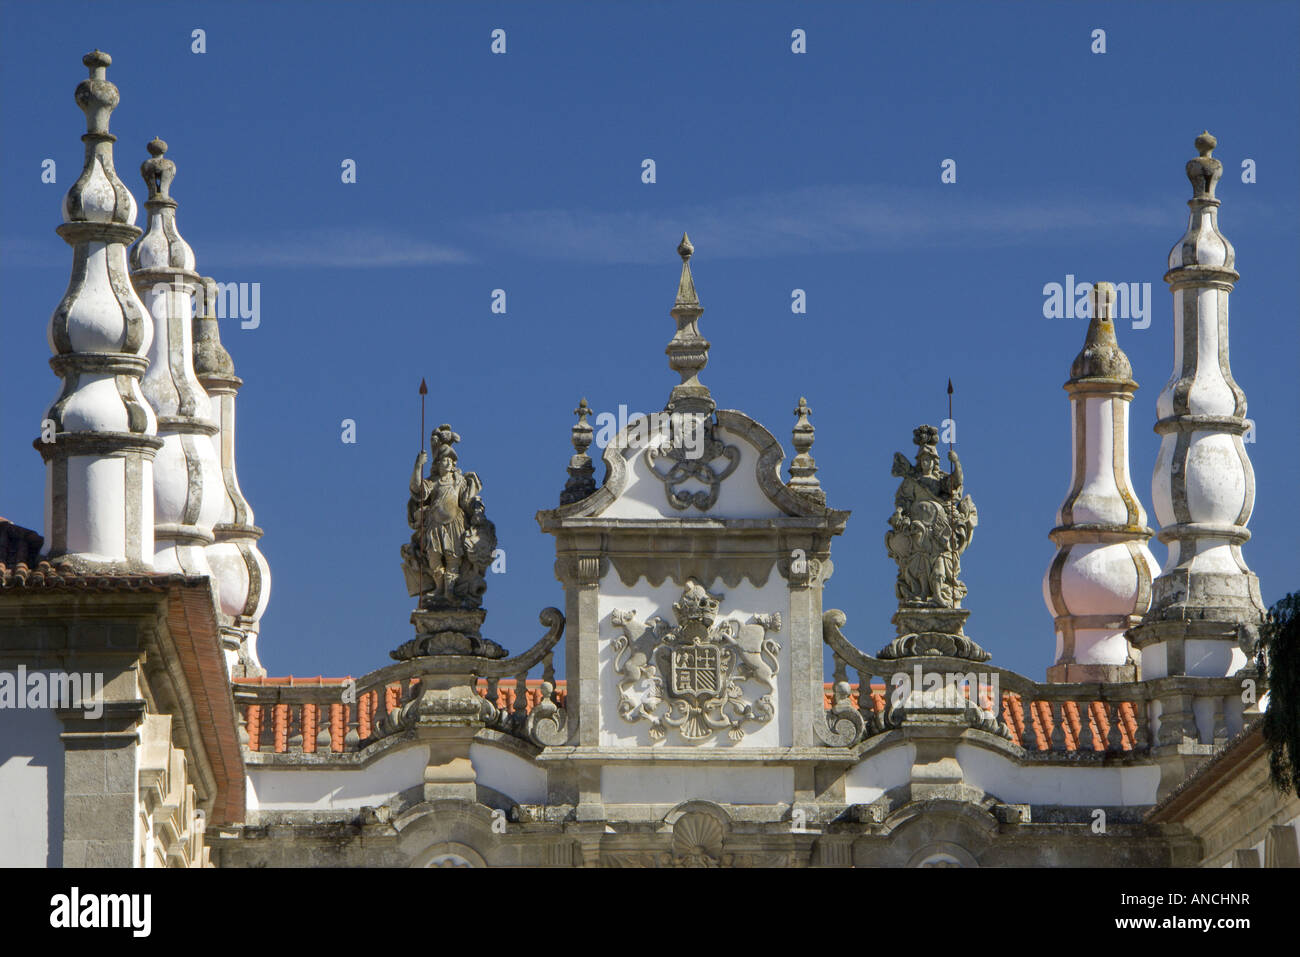 North Portugal Tras os montes district Mateus Palace detail of turrets and coat of arms ornate baroque architecture Stock Photo